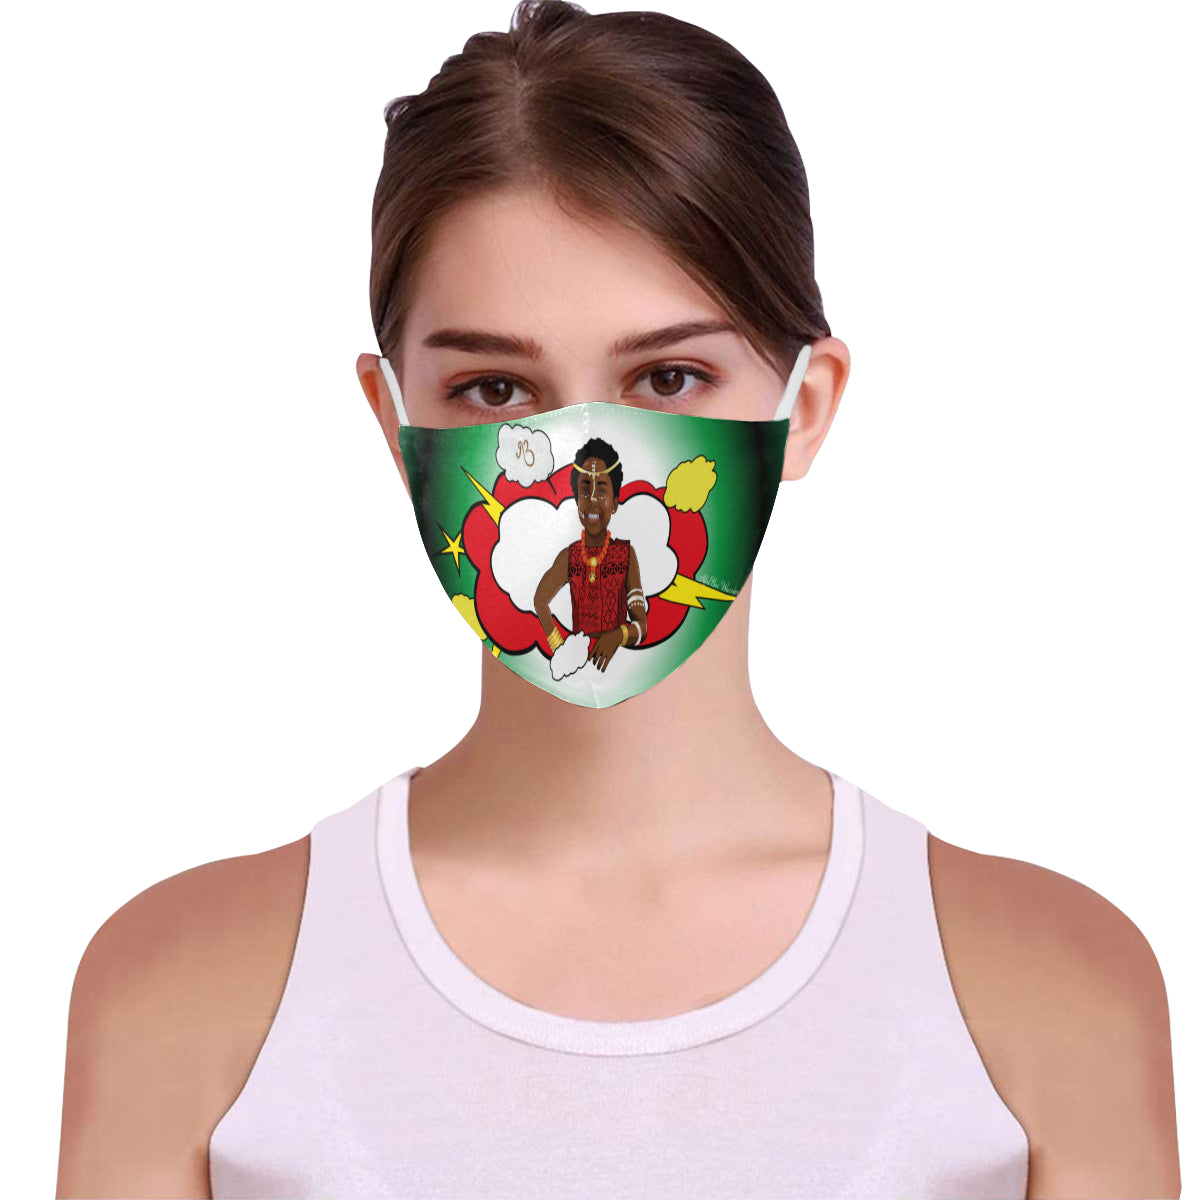 flyersetcinc Warrior Princess Cotton Fabric Face Mask with Filter Slot & Adjustable Strap (Pack of 5) - Non-medical use